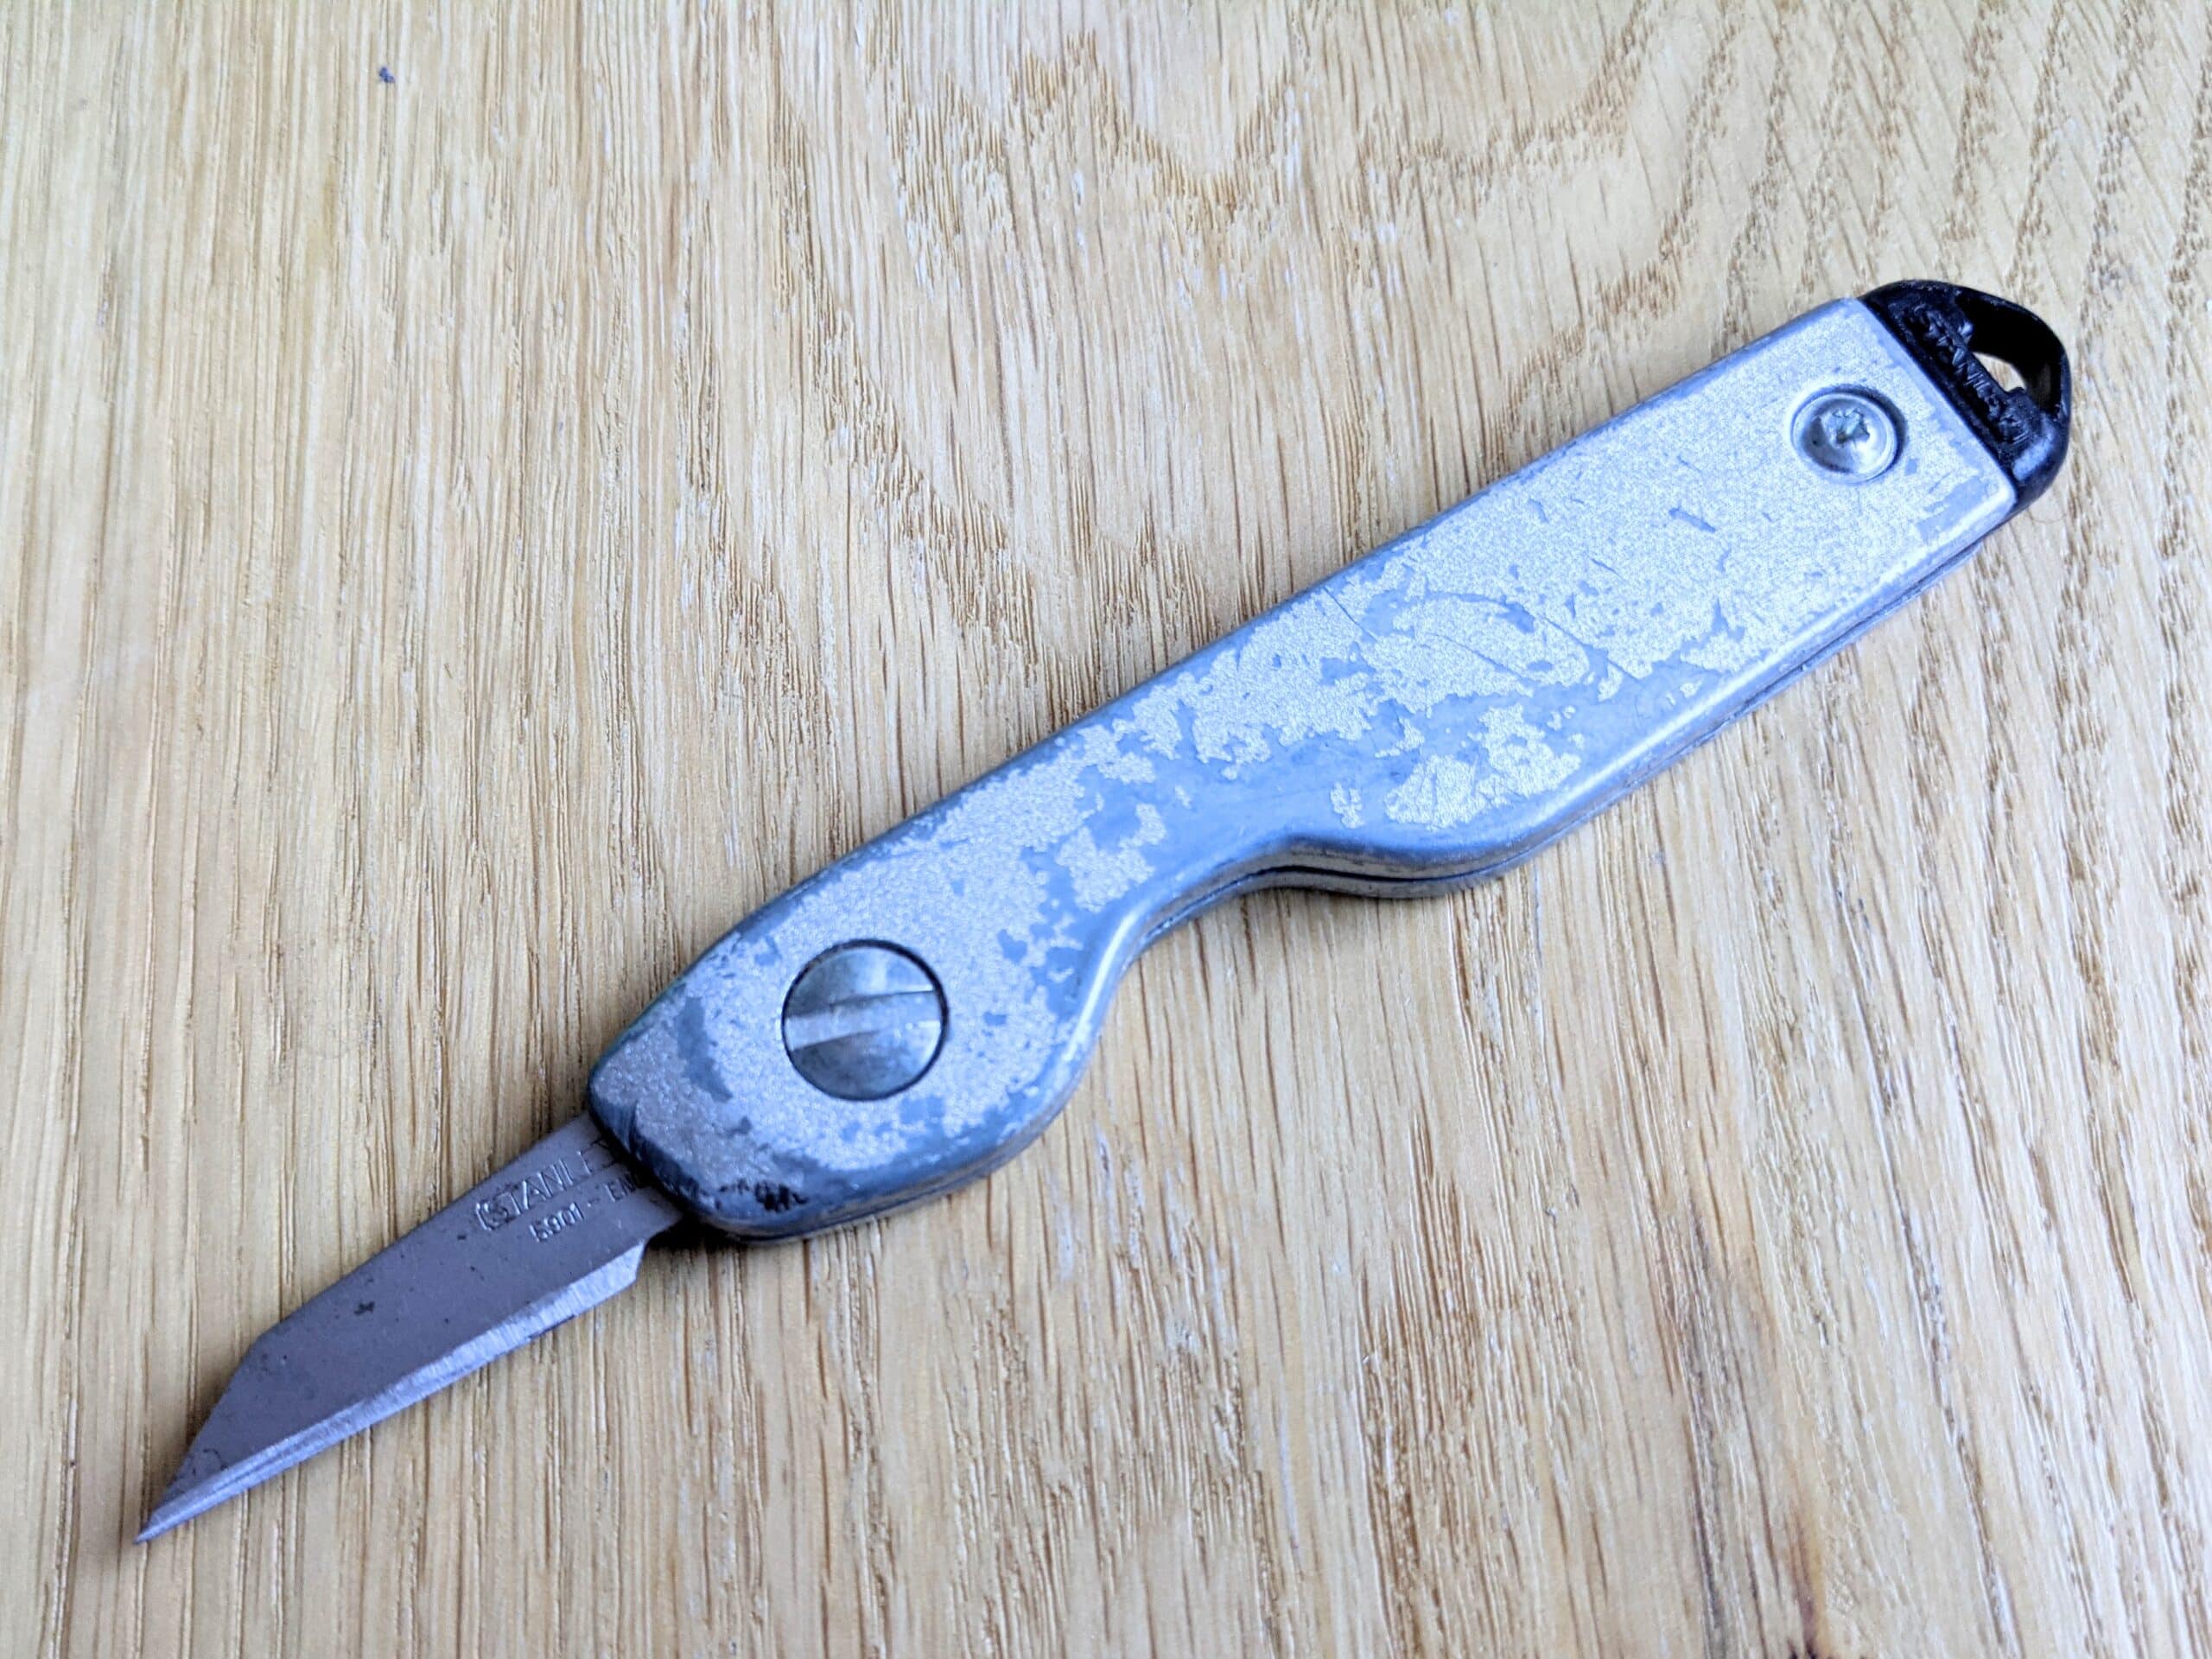 Sharpening Your Pocket Knife Like a Pro: 3 Awesome Methods